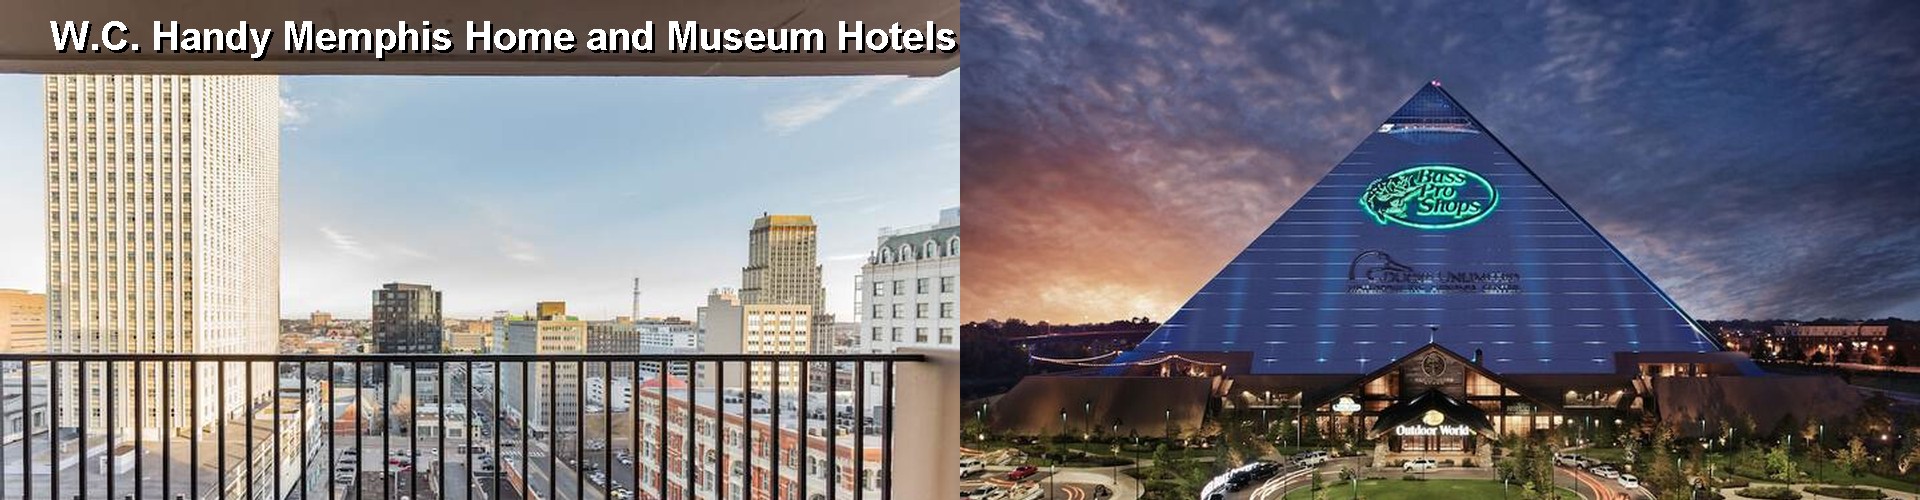 5 Best Hotels near W.C. Handy Memphis Home and Museum